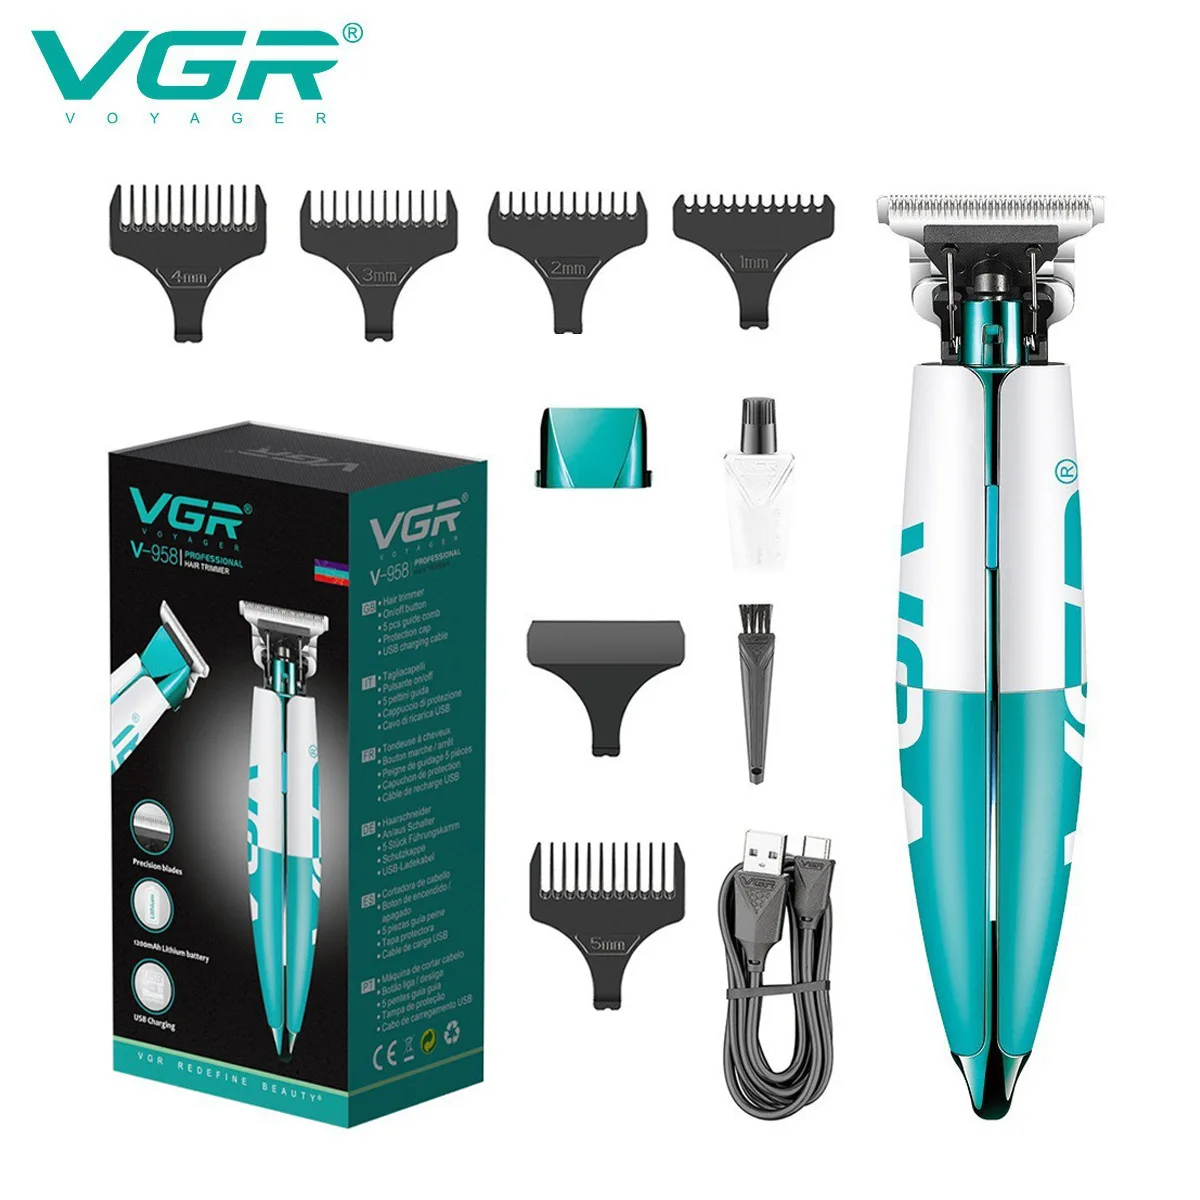 

VGR Professional Hair Trimmer Electric Cordless Hair Cutting Machine T Blade Rechargeable Barber 0mm Hair Trimmer for Men V-958